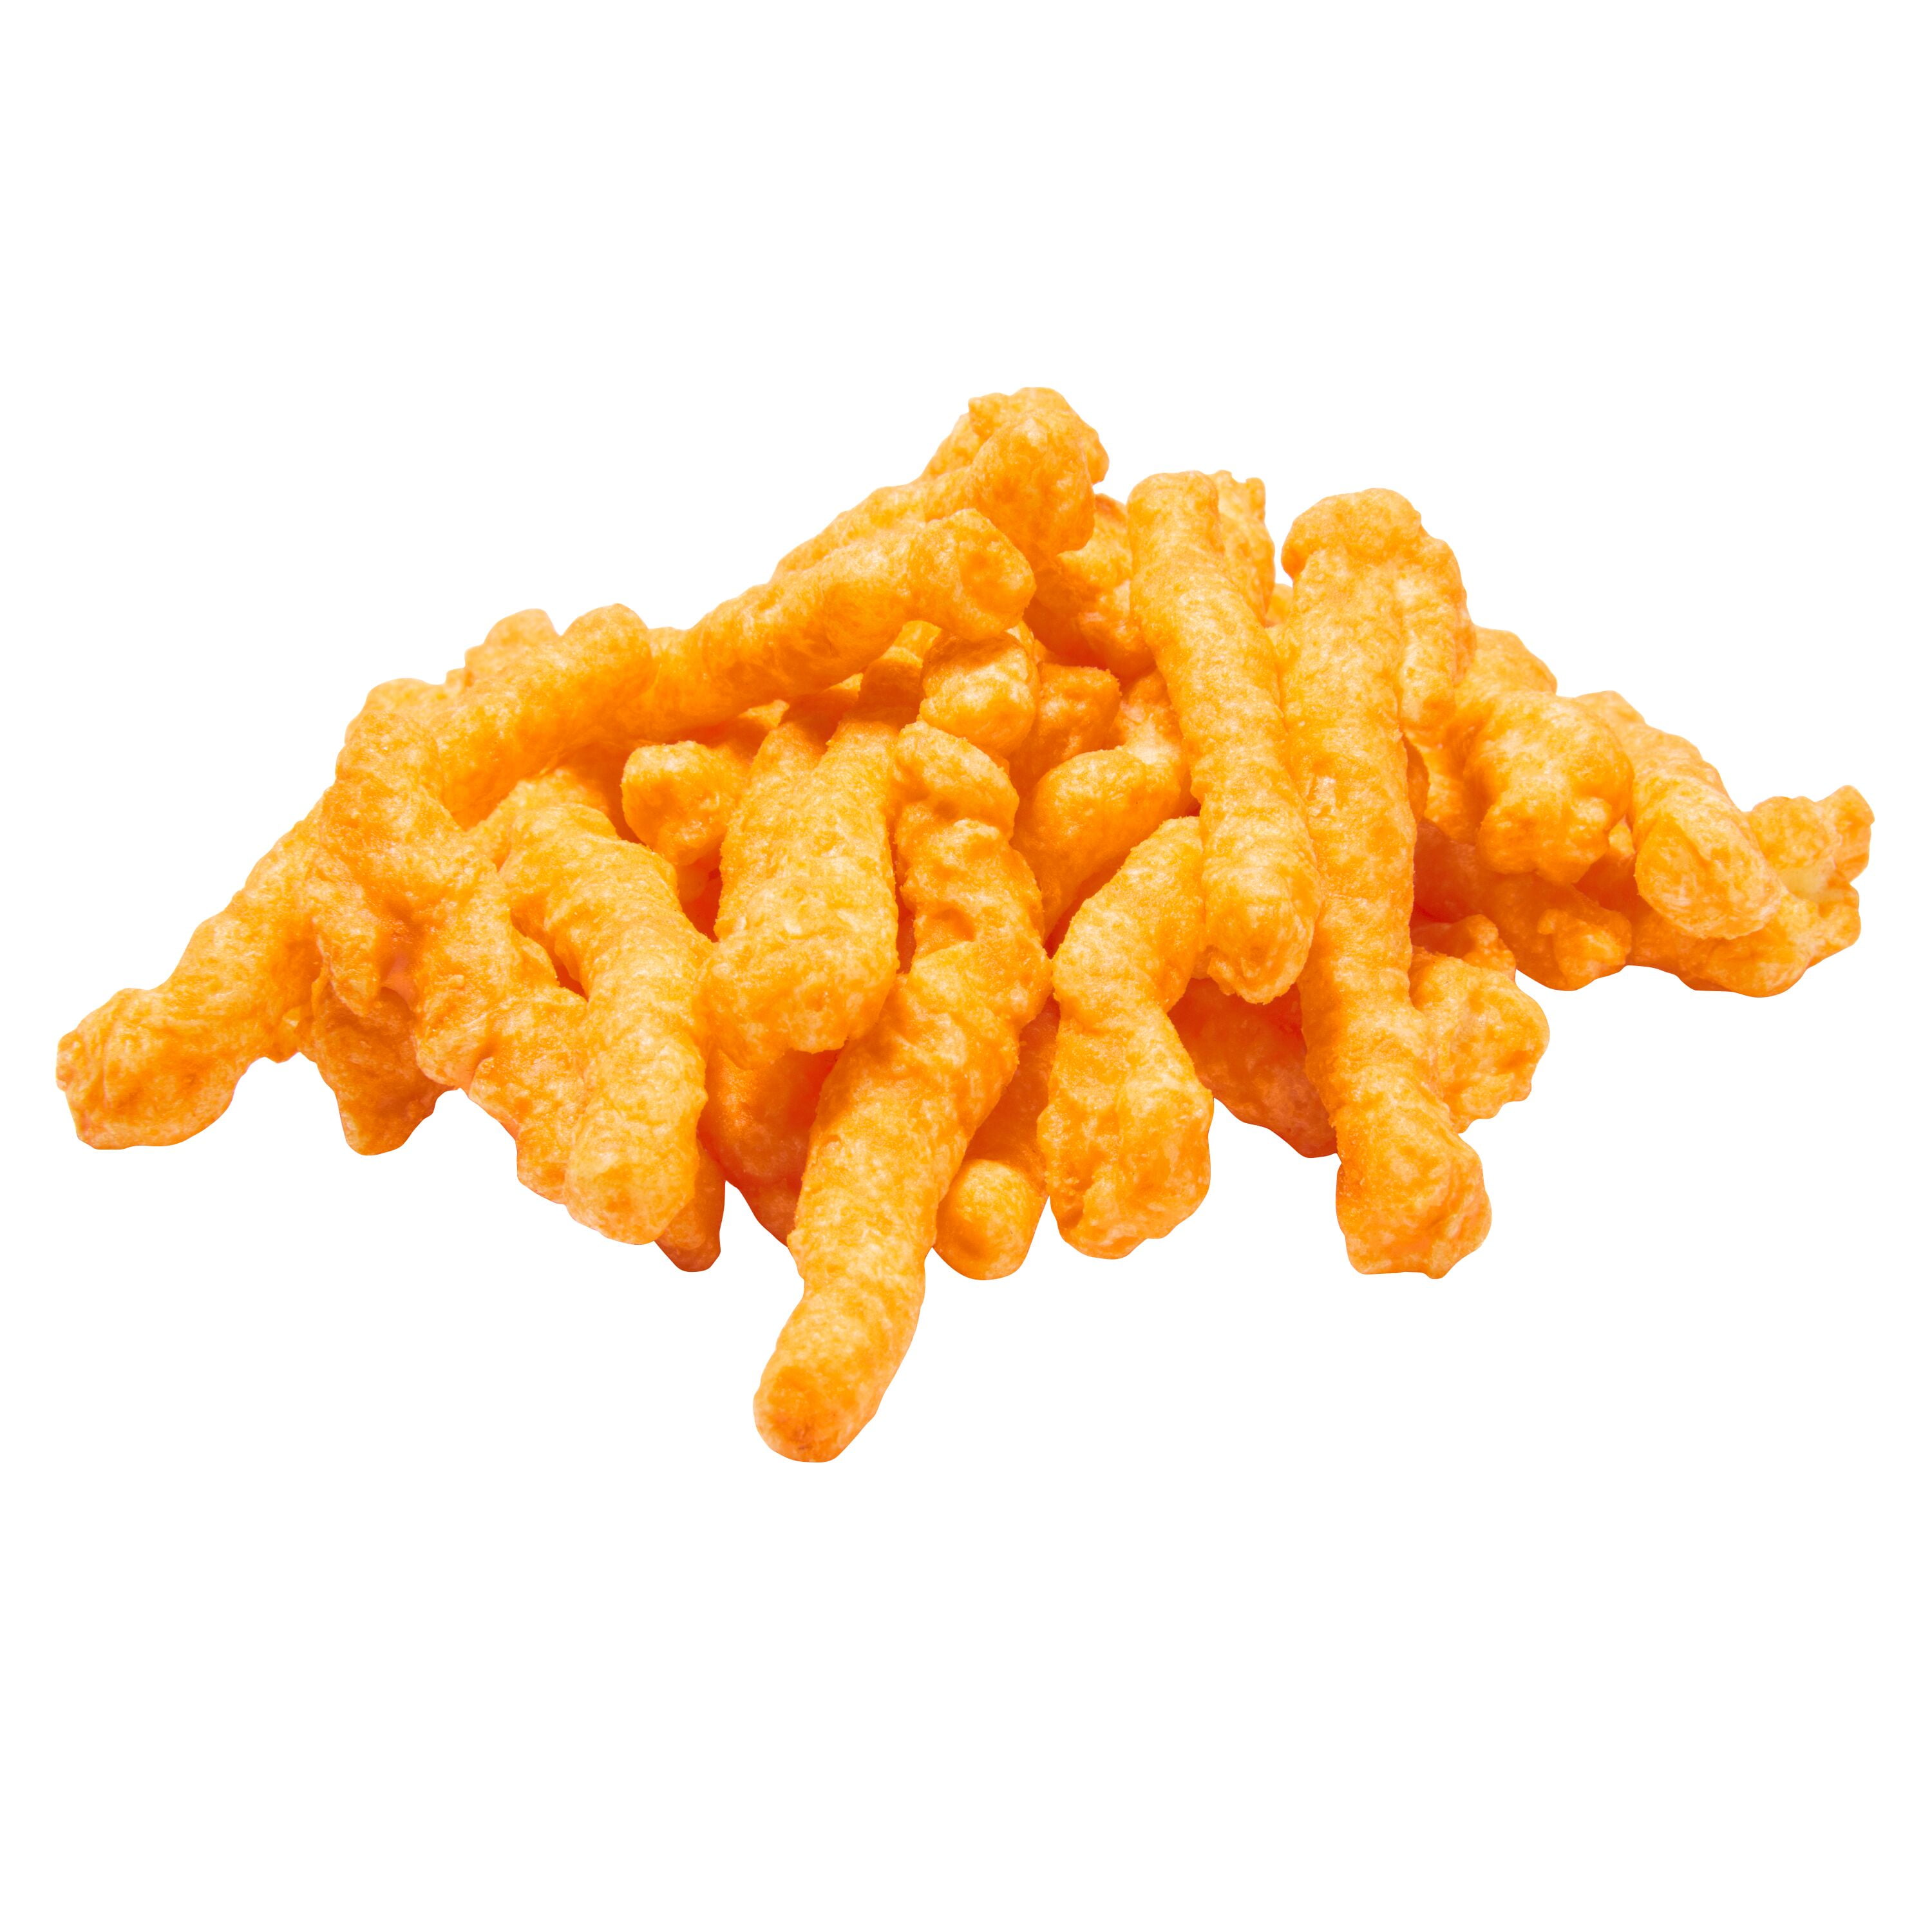 Cheetos Flamin' Hot Crunchy Cheese Flavored Snacks - 2.75 Ounce Bags - 6ct  Box